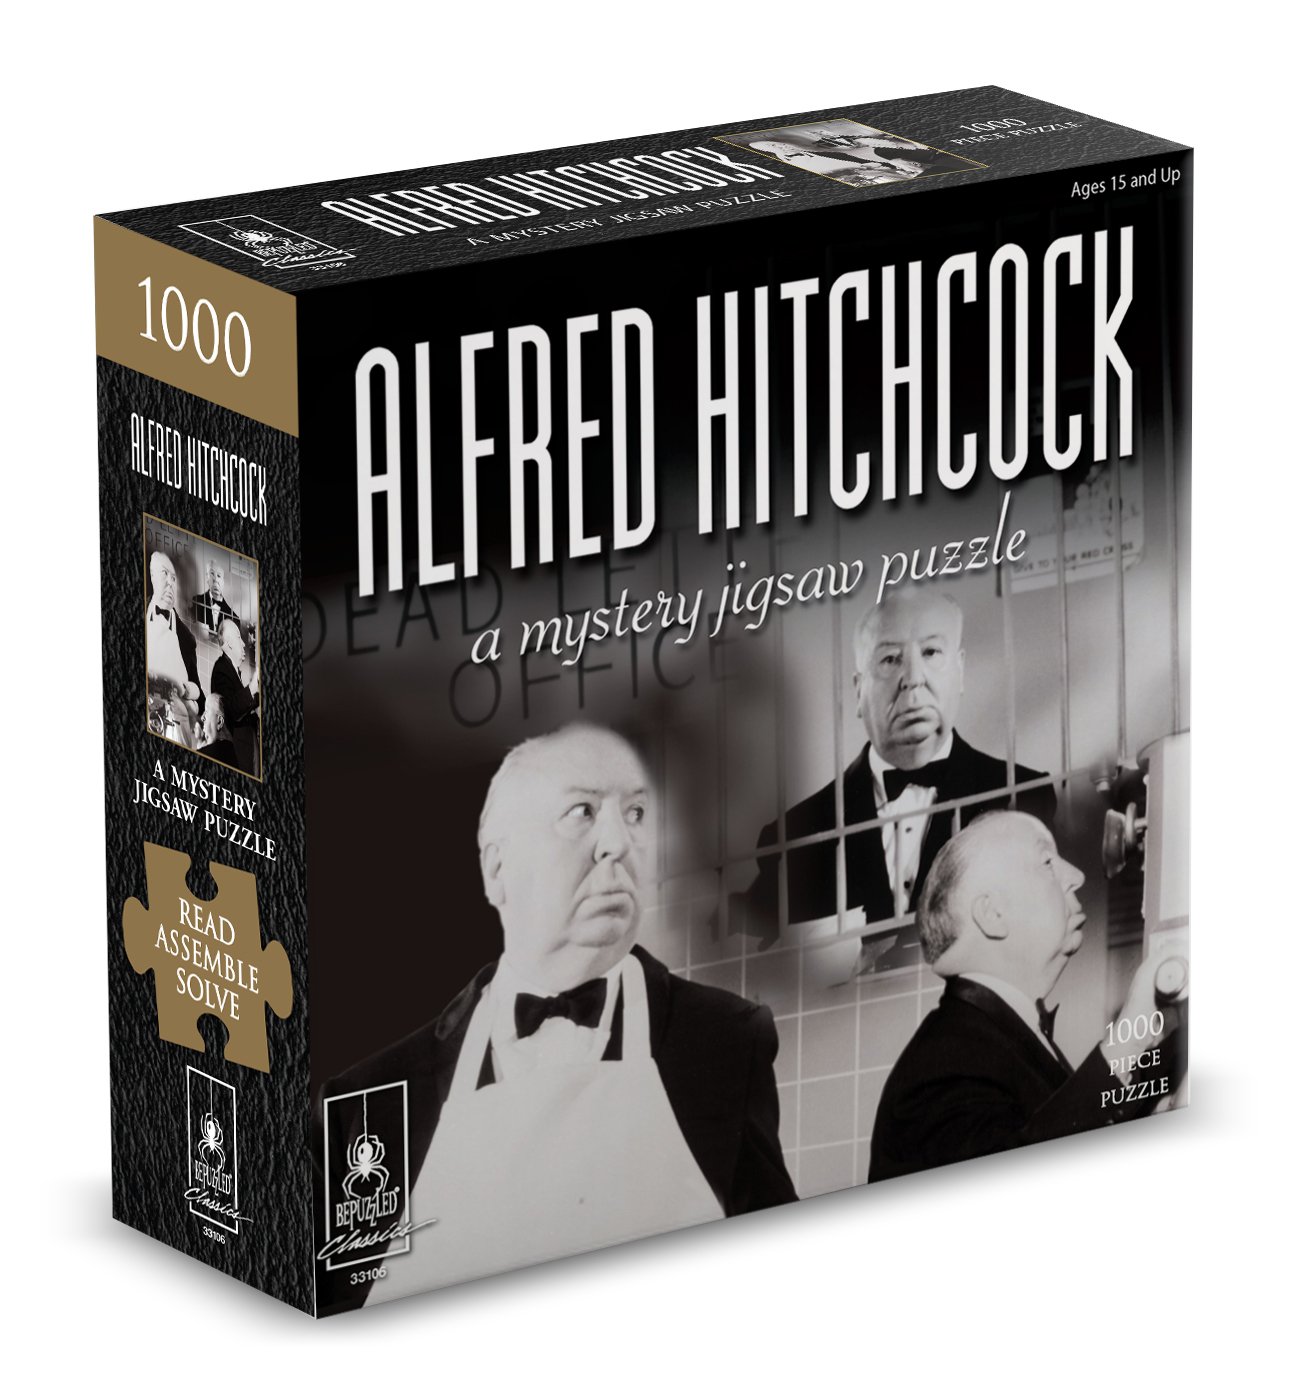 Black, Paul Lamond Games 7215 Classic Mystery Jigsaw Puzzle-Alfred Hitchcock 